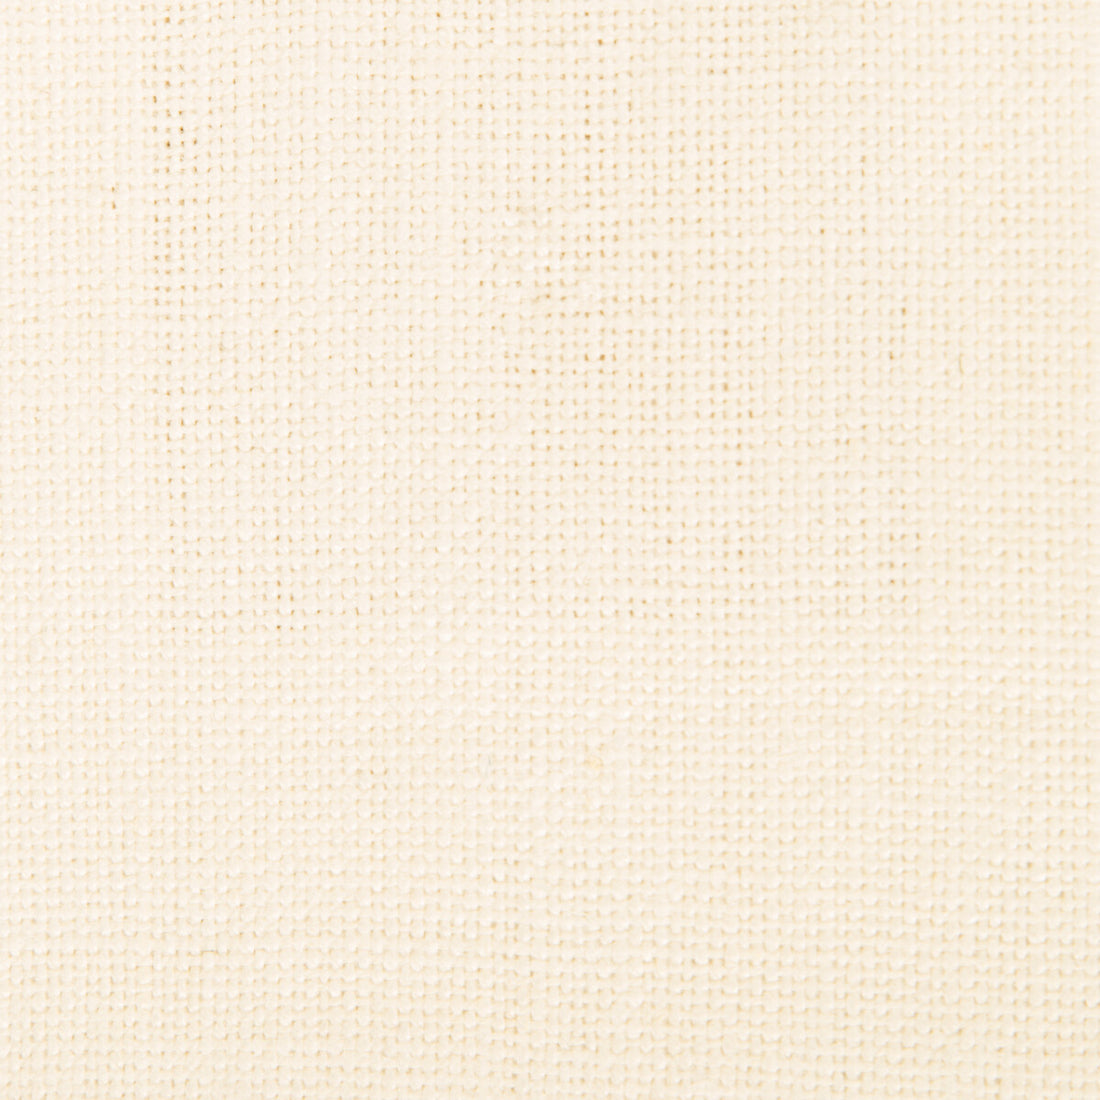 Nicaragua fabric in blanco color - pattern GDT5239.019.0 - by Gaston y Daniela in the Basics collection